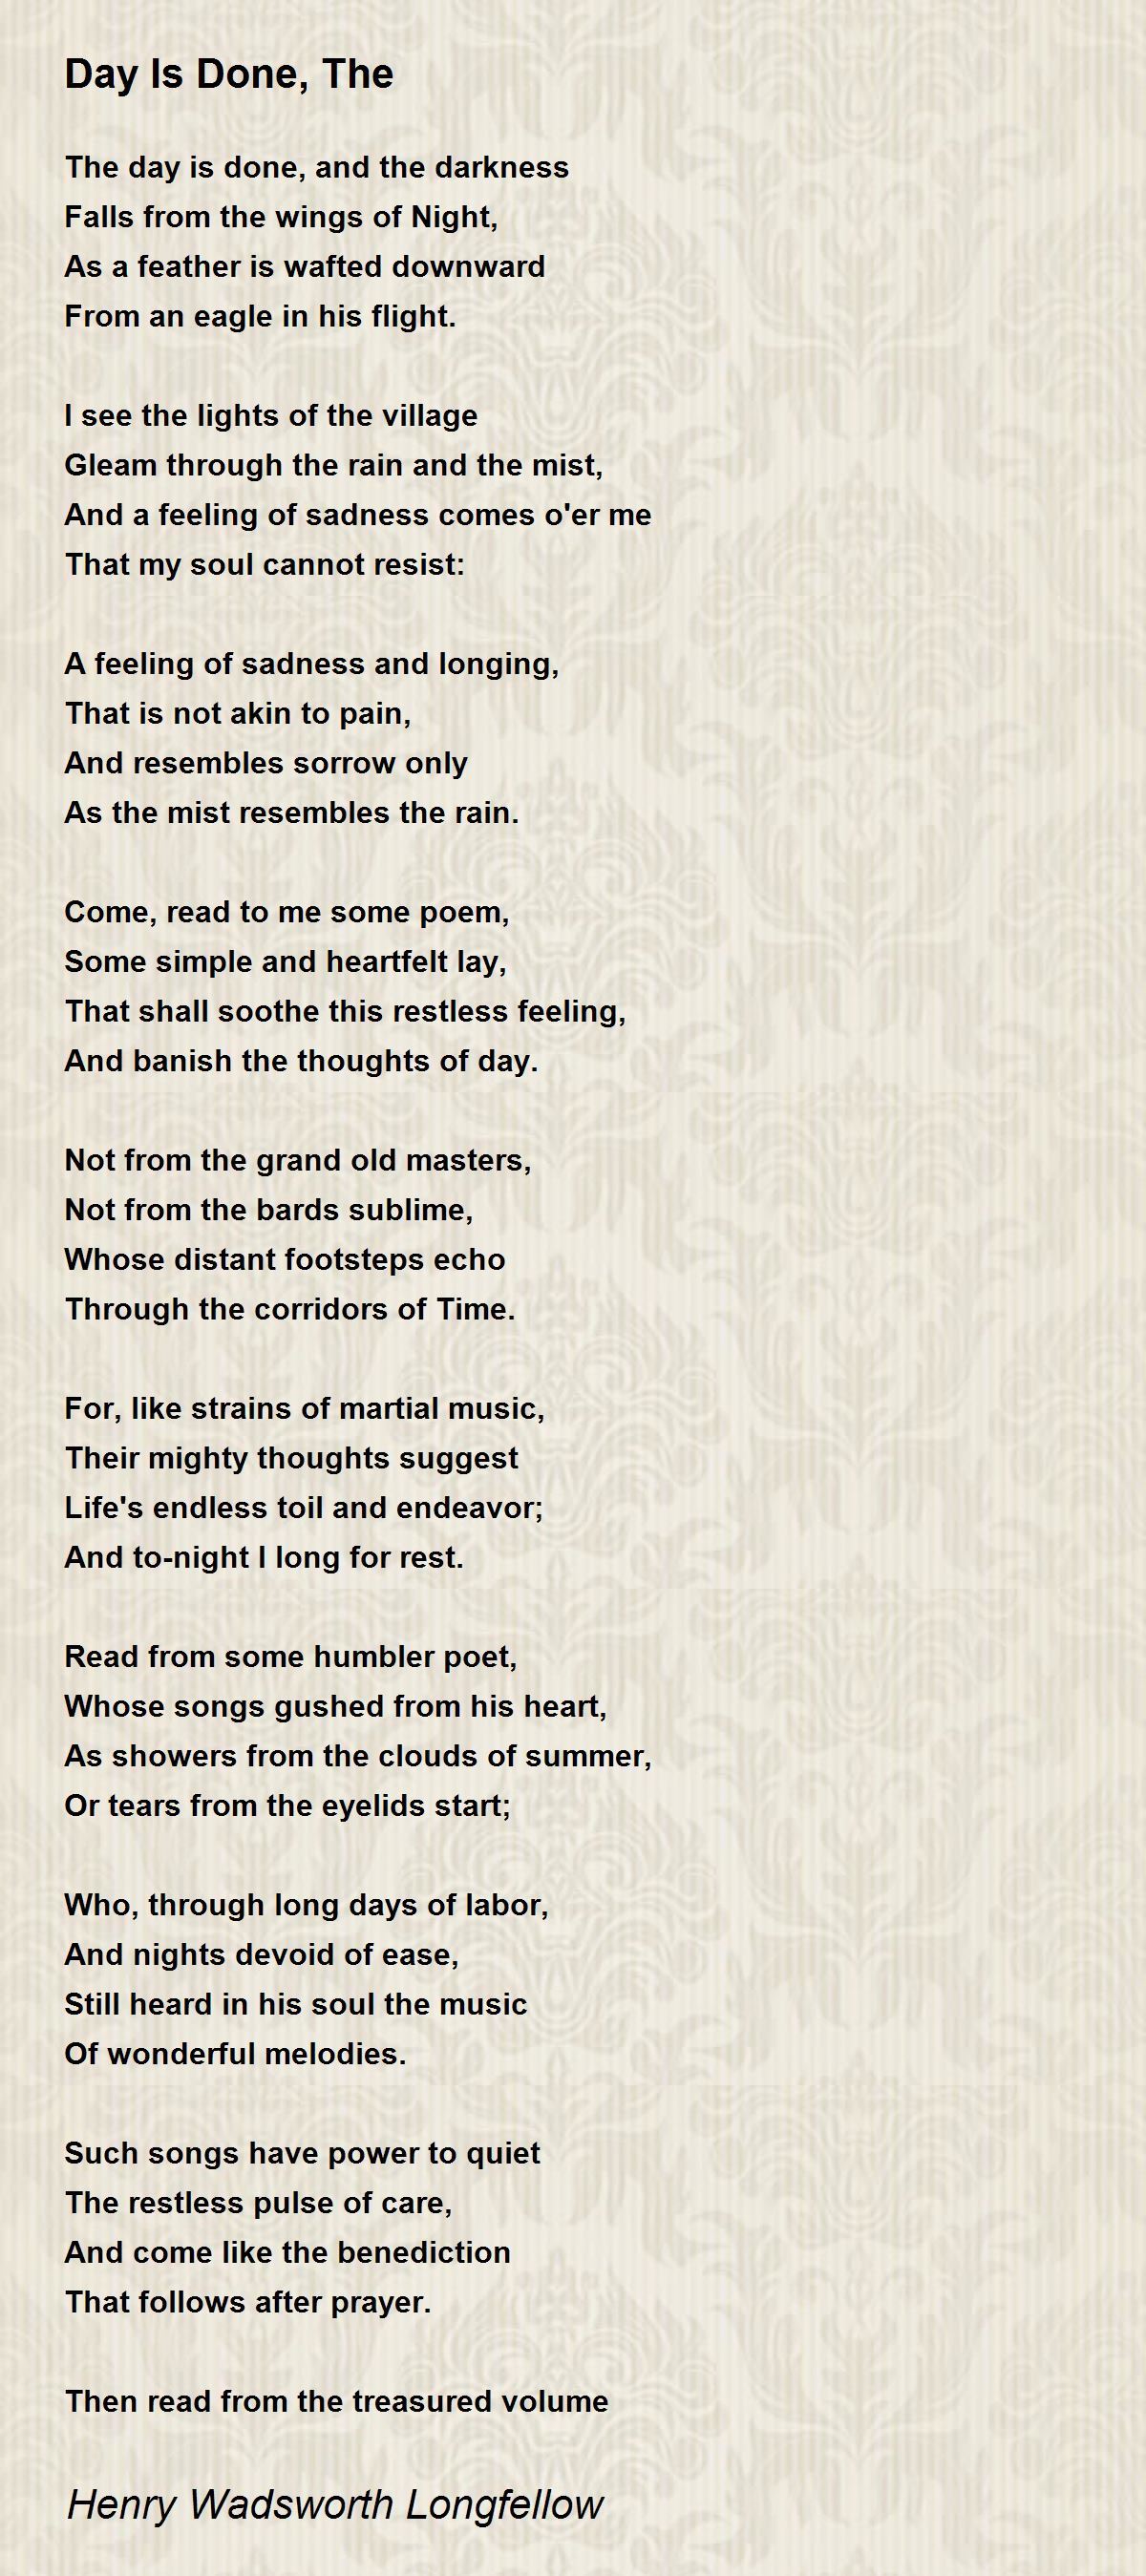 Day Is Done, The by Henry Wadsworth Longfellow - Day Is Done, The Poem